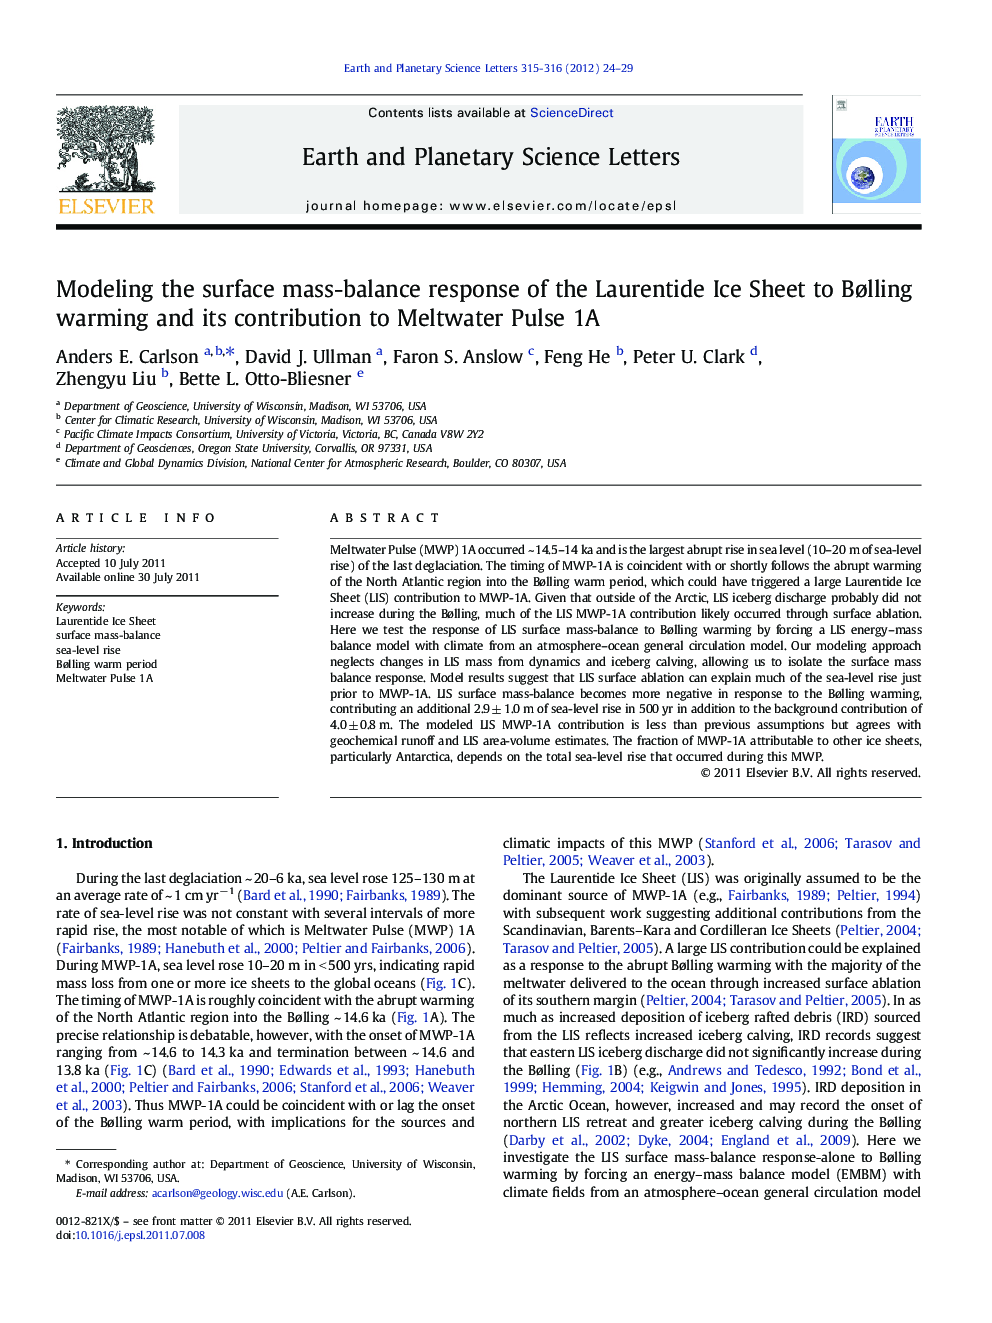 Modeling the surface mass-balance response of the Laurentide Ice Sheet to Bølling warming and its contribution to Meltwater Pulse 1A